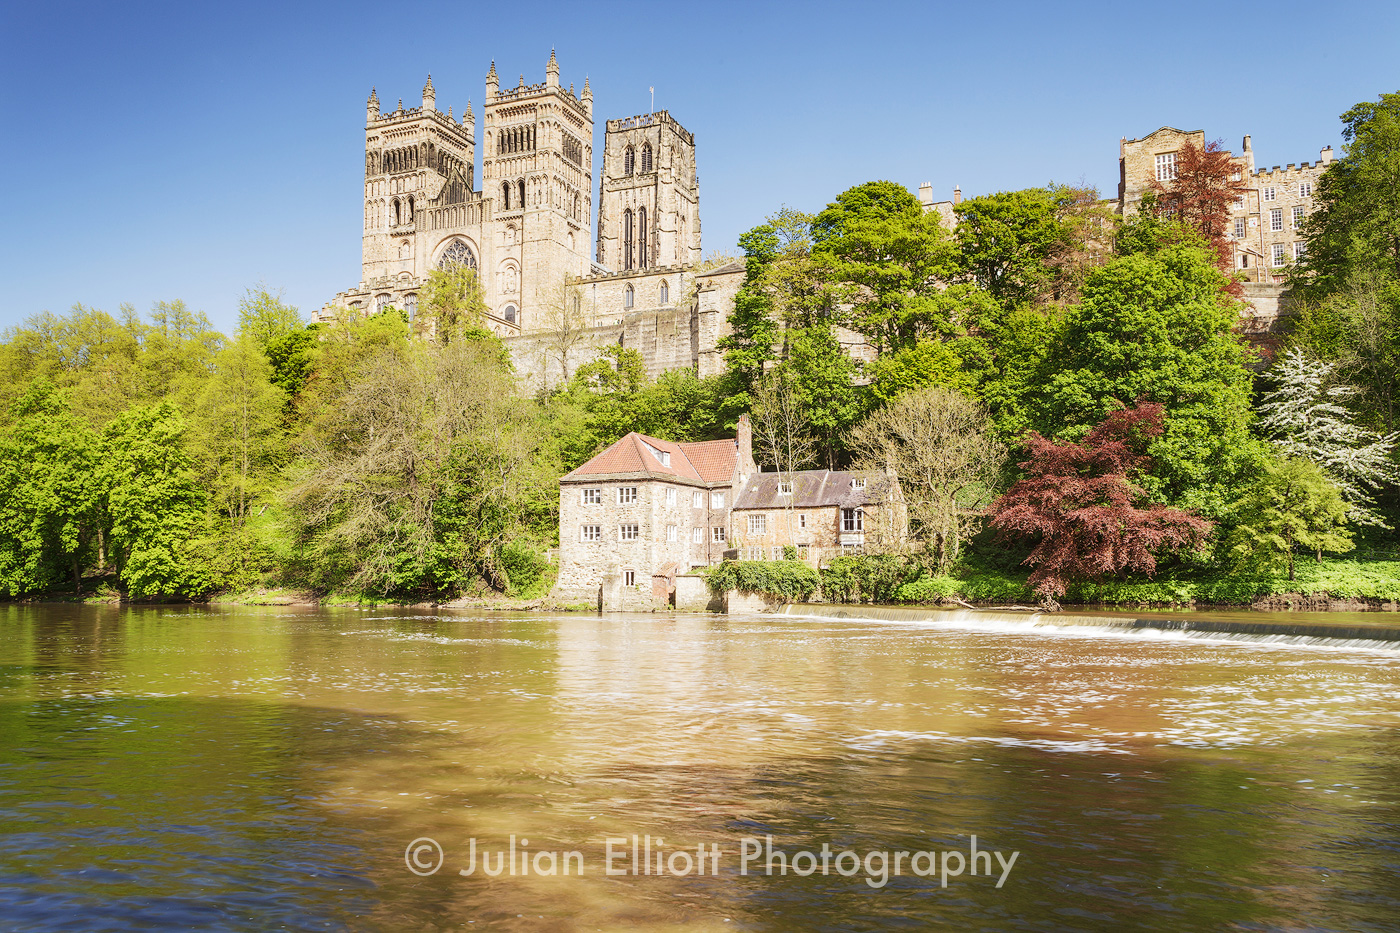 Durham cathedral in the city of Durham, UK